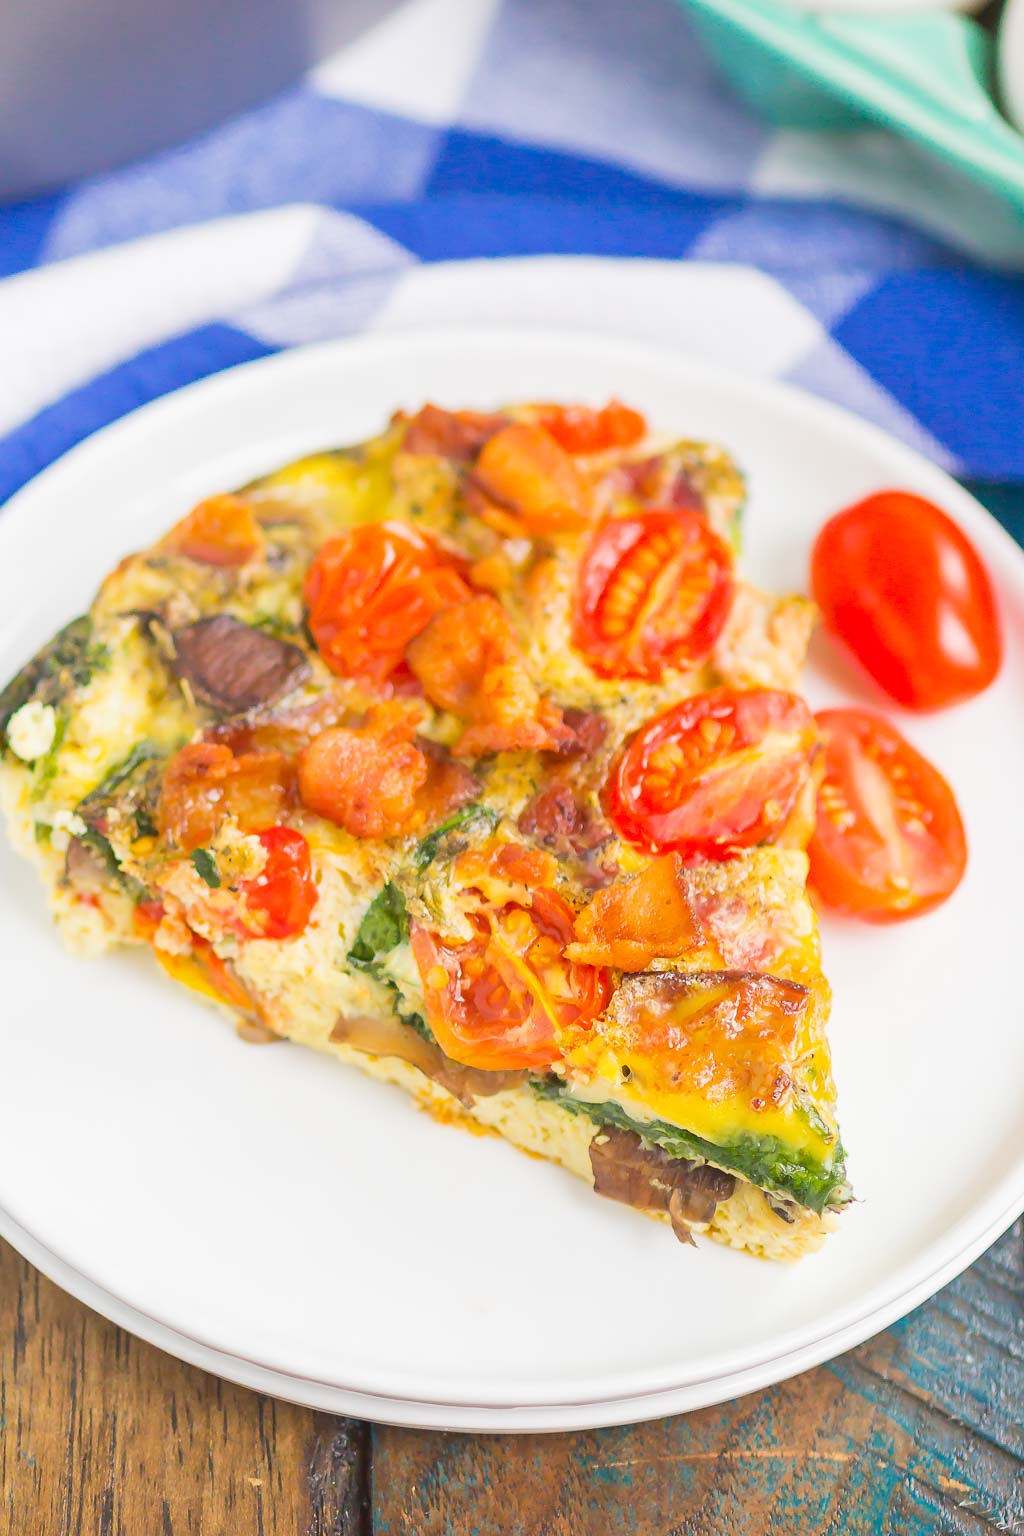 This Bacon and Tomato Frittata is a simple dish that's ready in less than an hour. Filled with crisp bacon, tender mushrooms, spinach and tomatoes, this recipe makes a delicious breakfast or brunch! #frittata #frittatarecipe #easyfrittata #bacon #baconfrittata #tomatofrittata #mushroomfrittata #breakfast #easybreakfast #breakfastrecipe